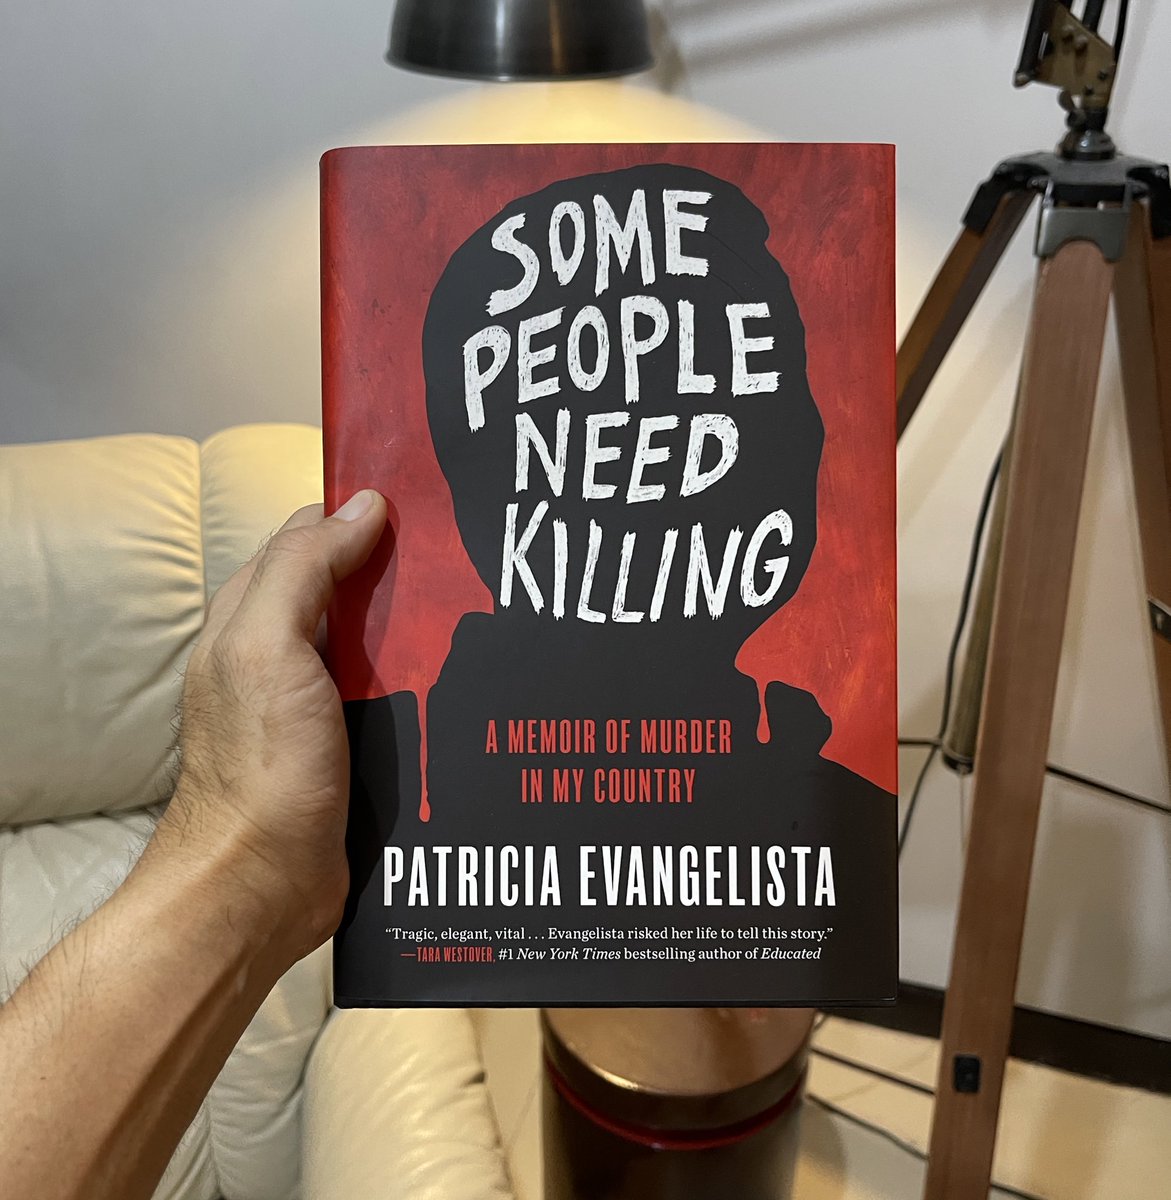 Napakahalaga ng librong ito. It’s already on restock in the Philippines, but you can reserve a copy here: 

fullybookedonline.com/book-political…

#SomePeopleNeedKilling